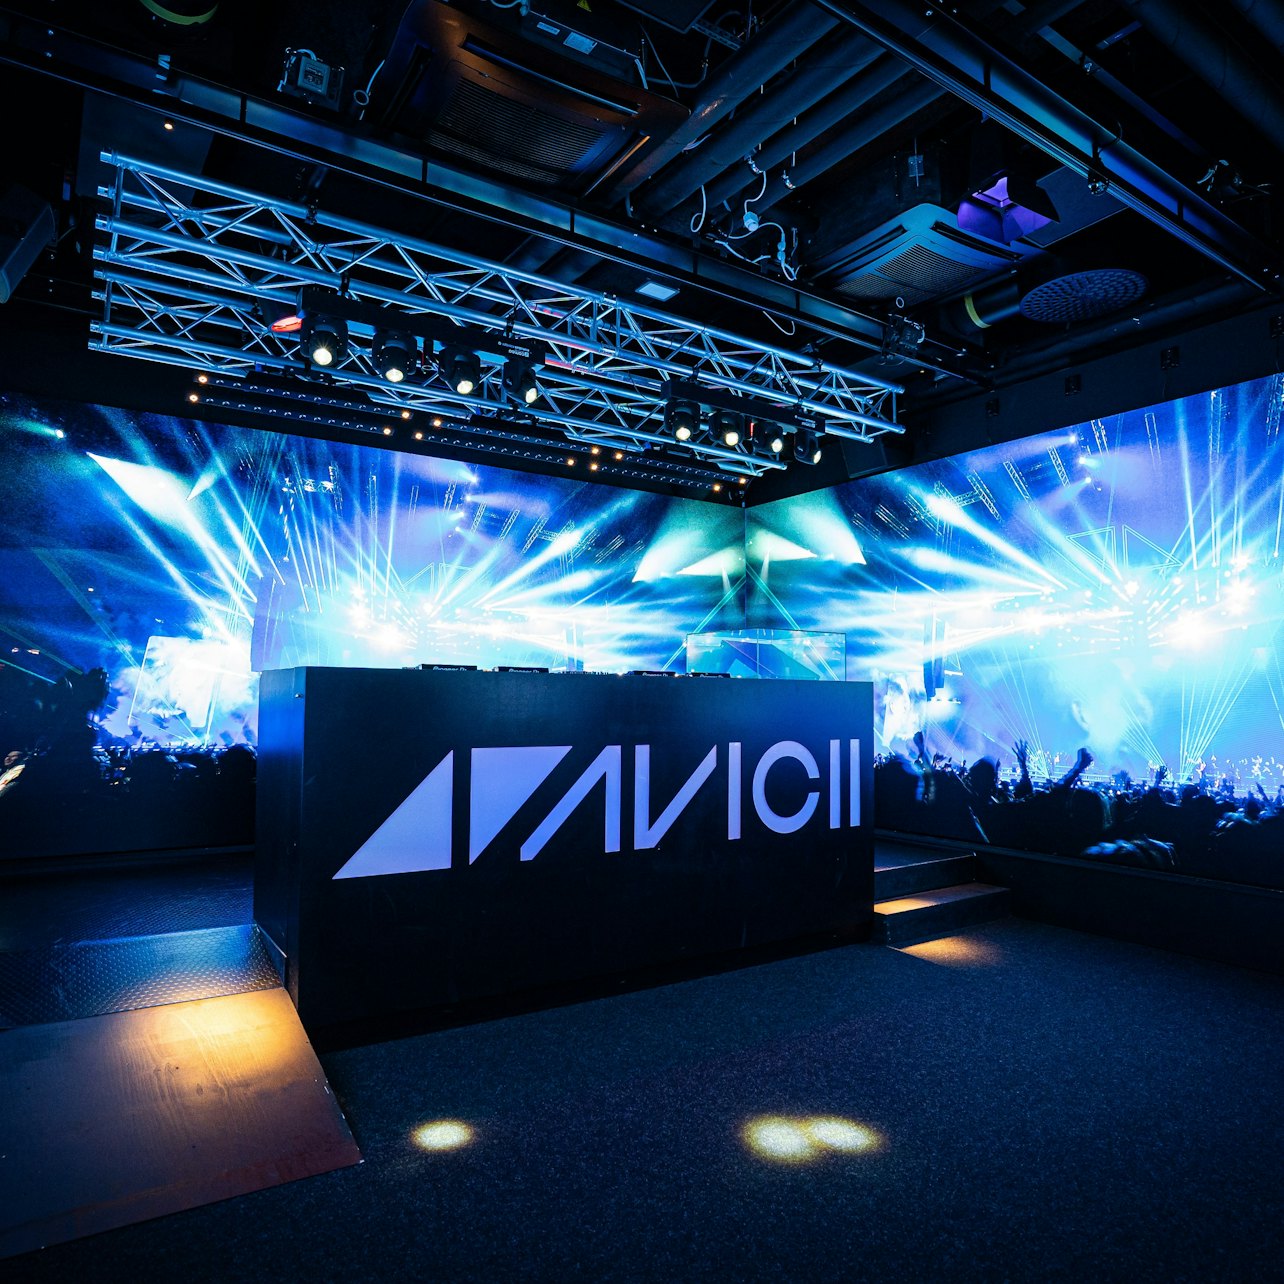 Avicii Experience - Accommodations in Stockholm